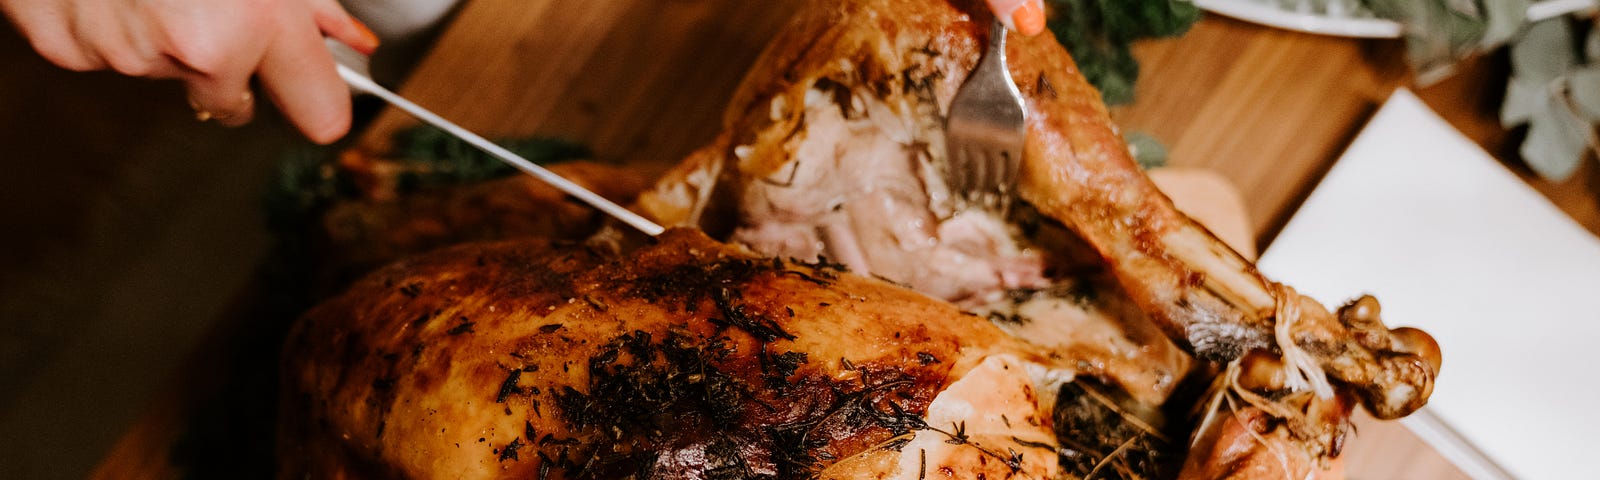 Photo of Someone Carving a Turkey by Claudio Schwarz on Unsplash